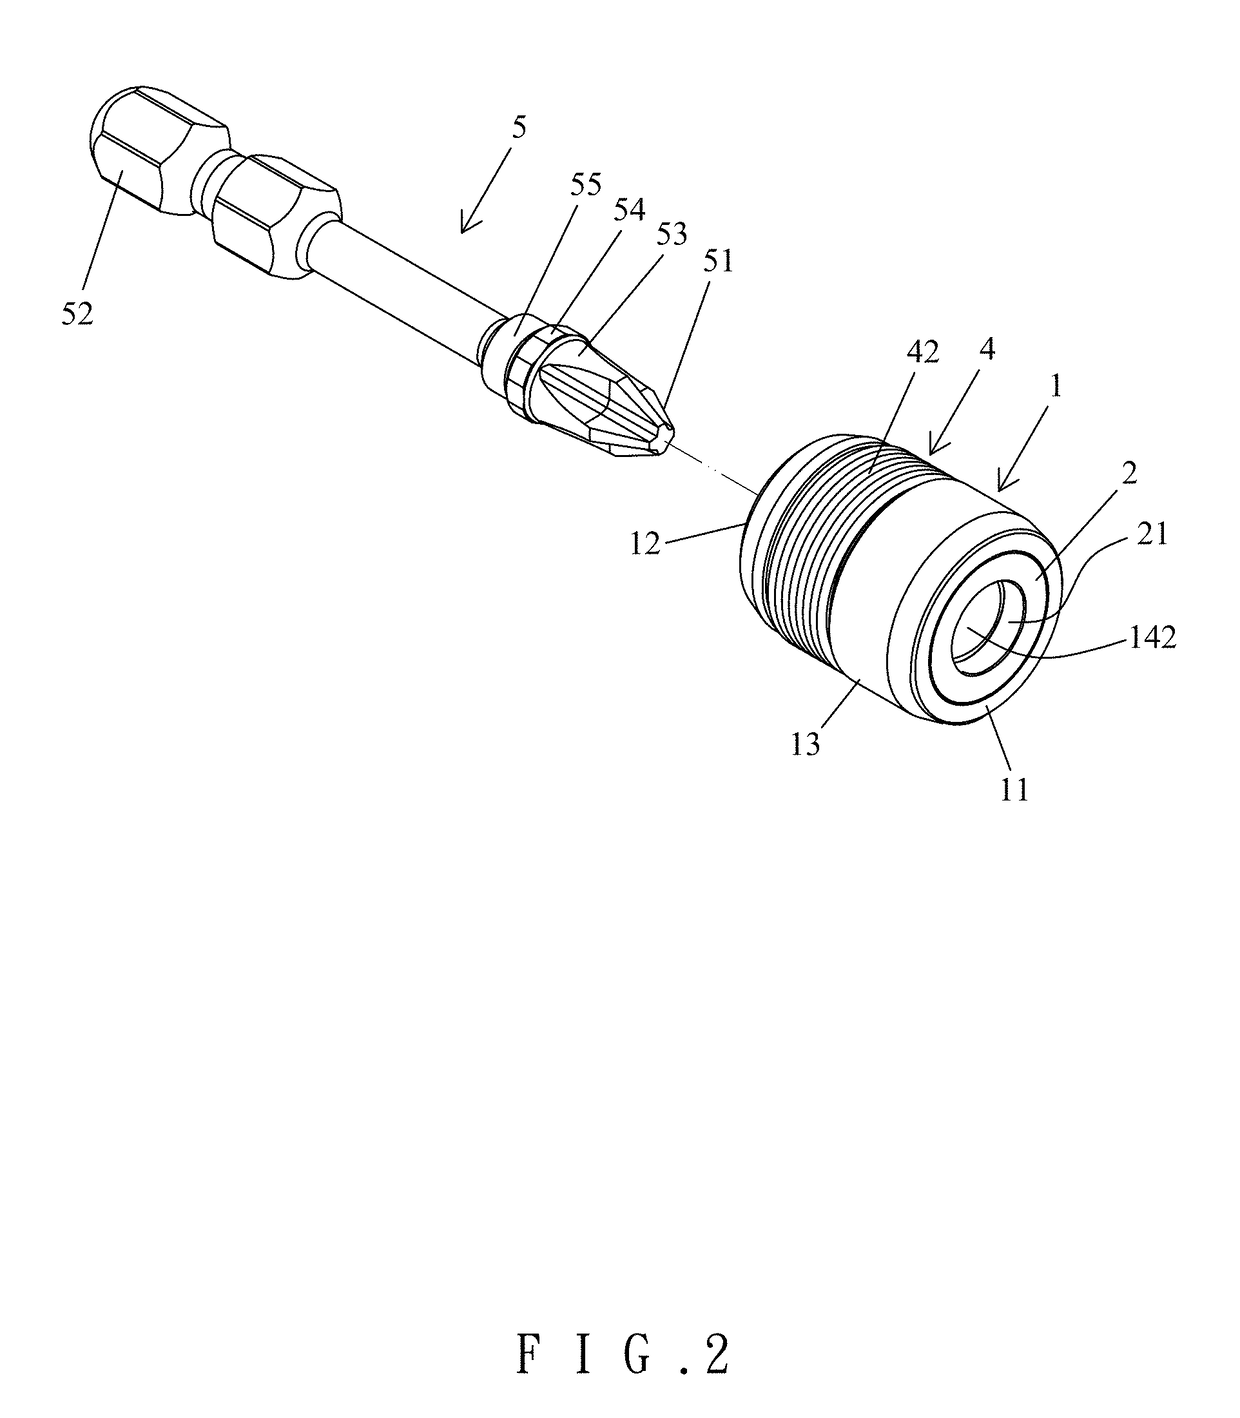 Screwdriver bit assembly with a magnetic structure